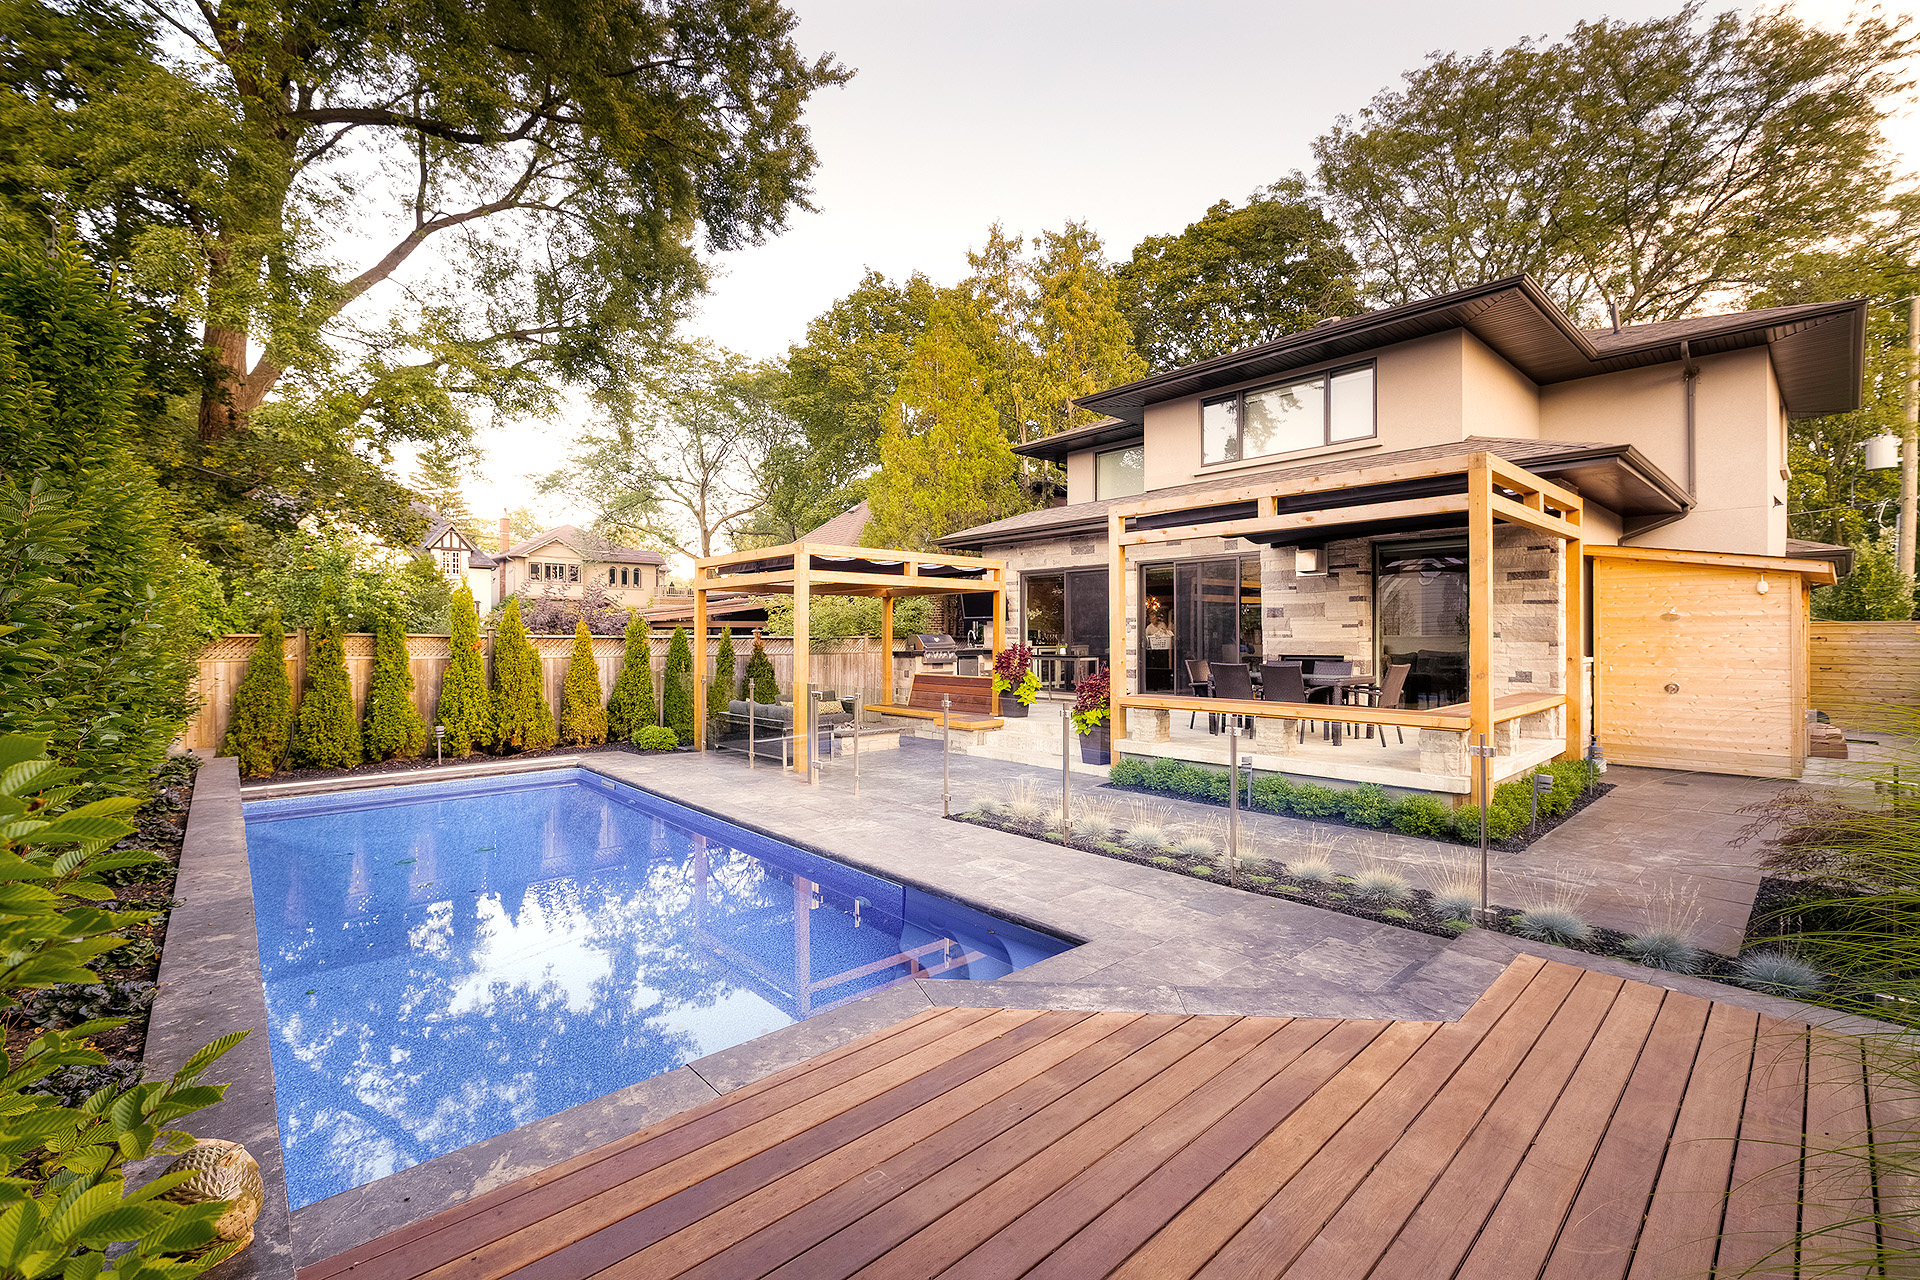 7 Budget-Friendly Ideas for Backyard Remodeling